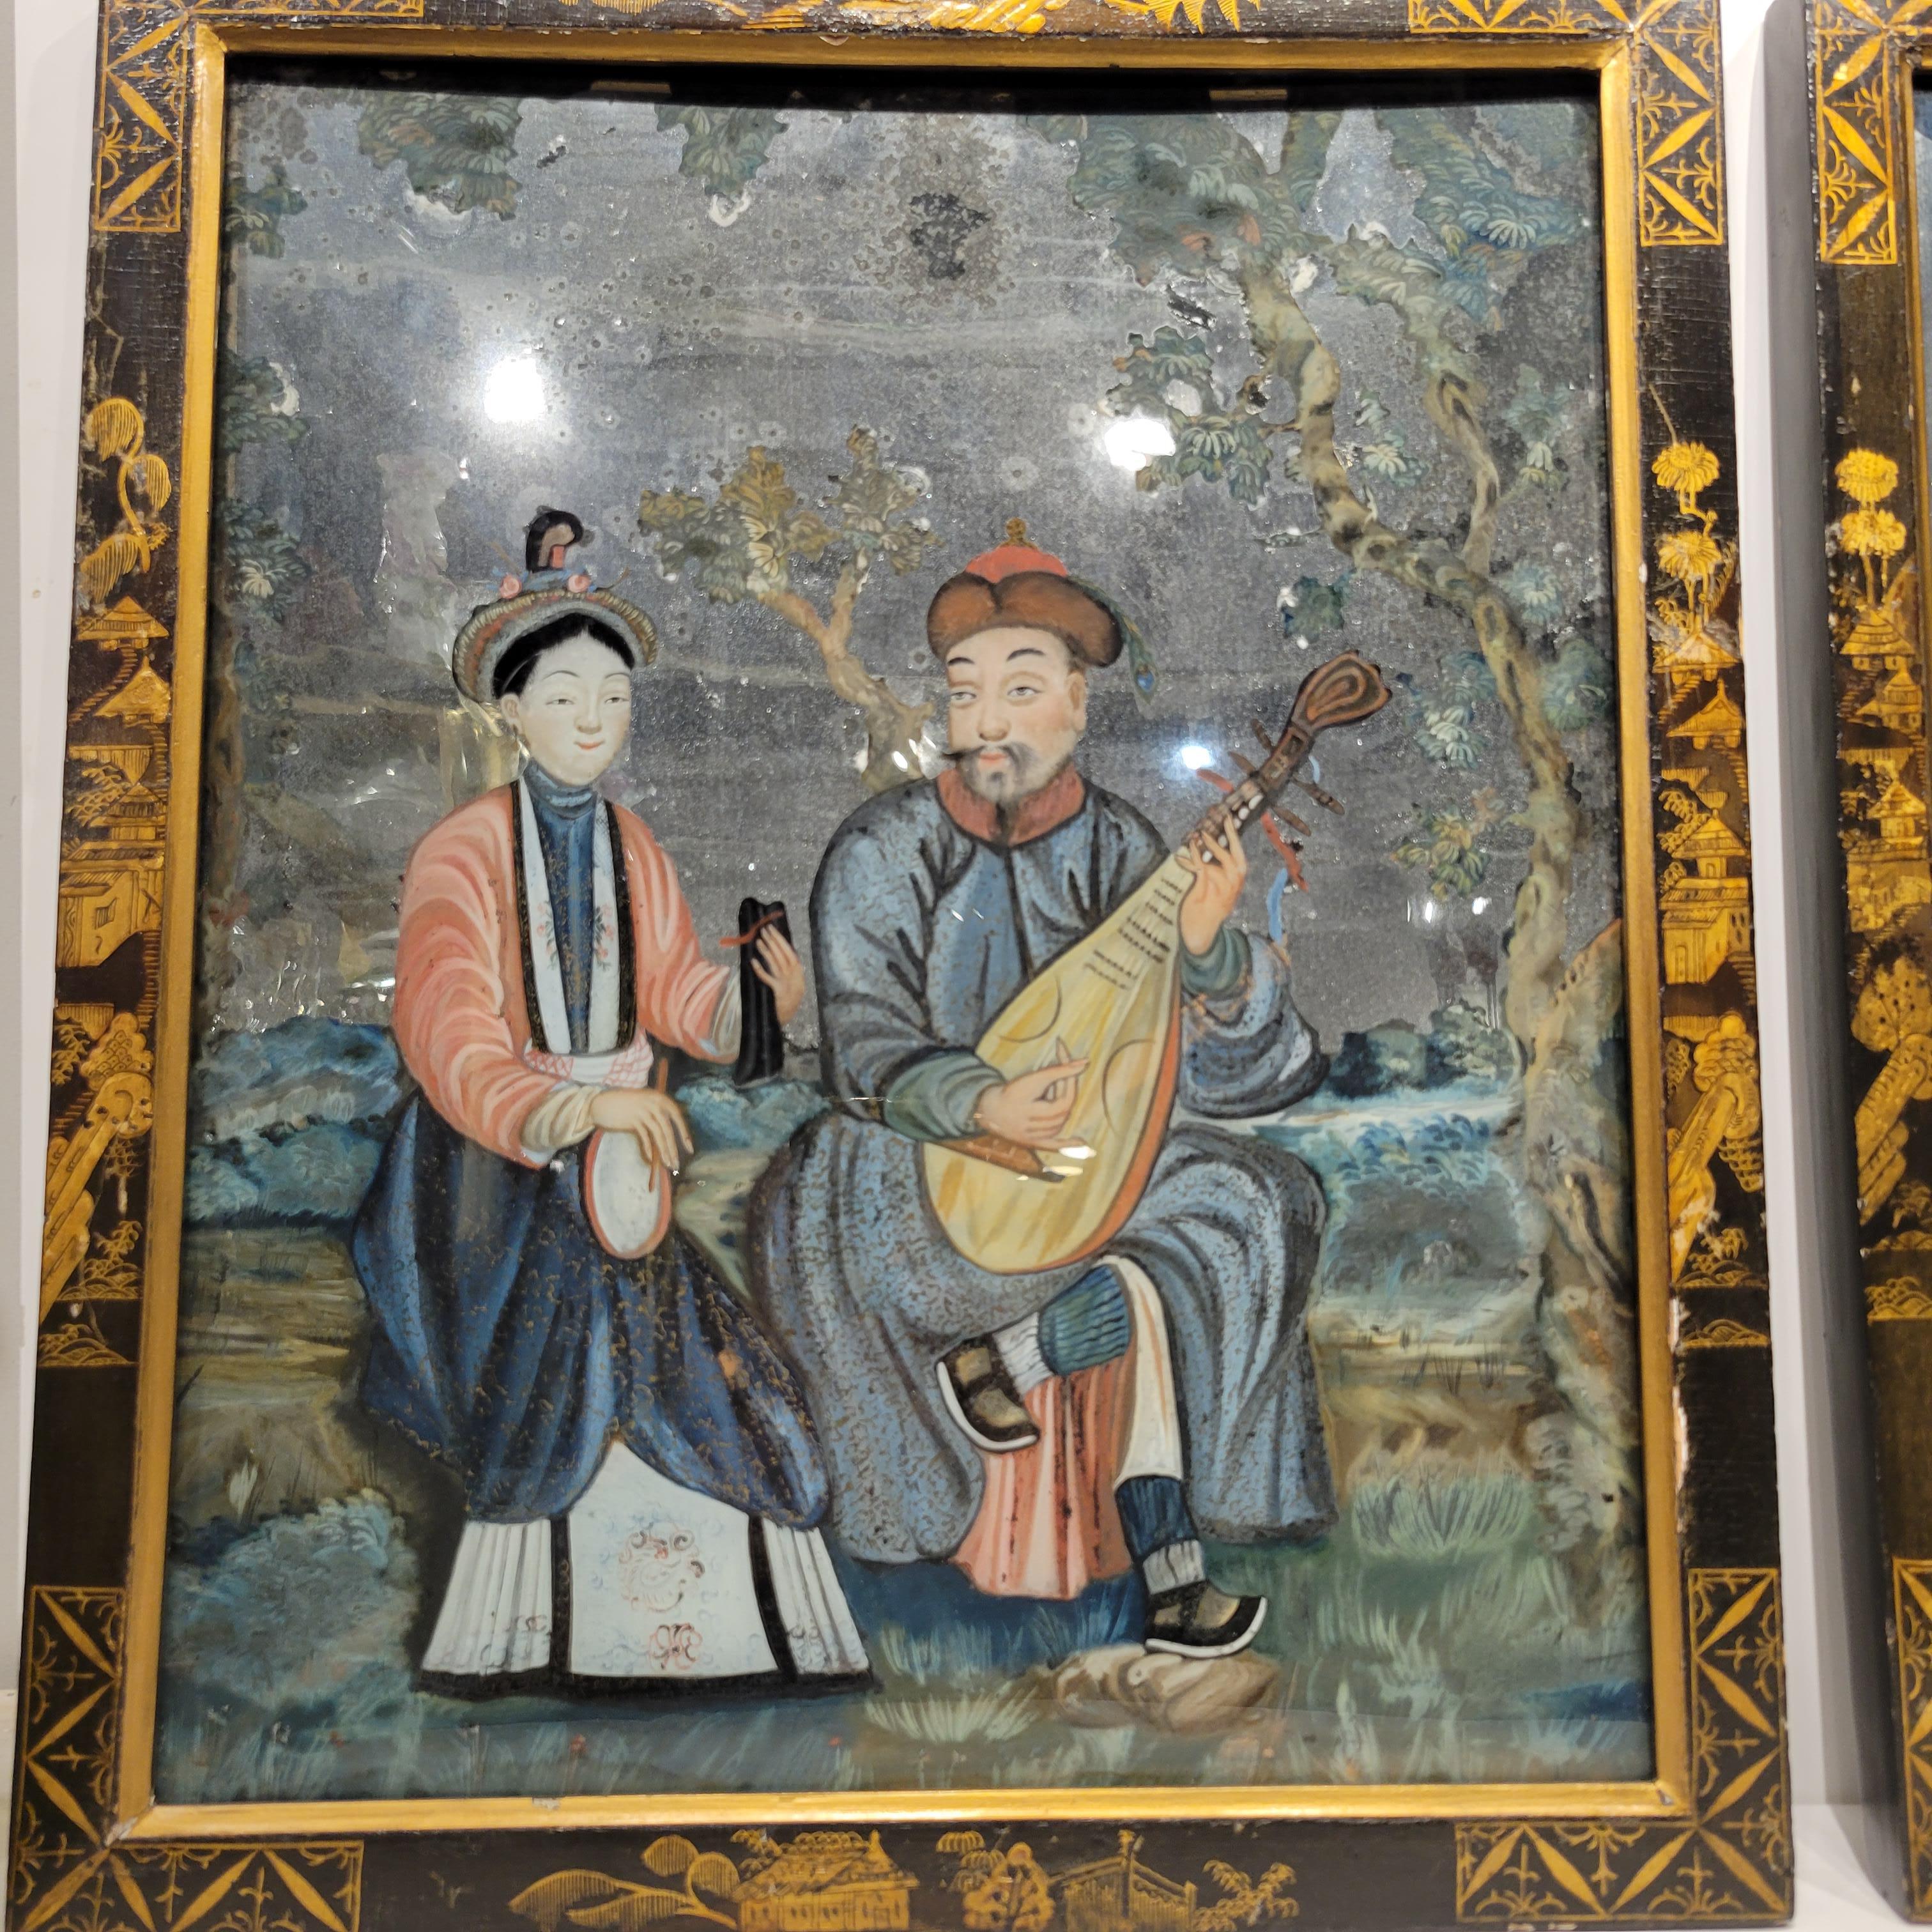 one painted with a lady seated holding a tobacco pipe, the other painted with a scholar playing a pipa with a lady seated beside him playing percussion instruments, with matching black lacquered and gilt-decorated wood frame

16 1/2 in. by 13 5/8